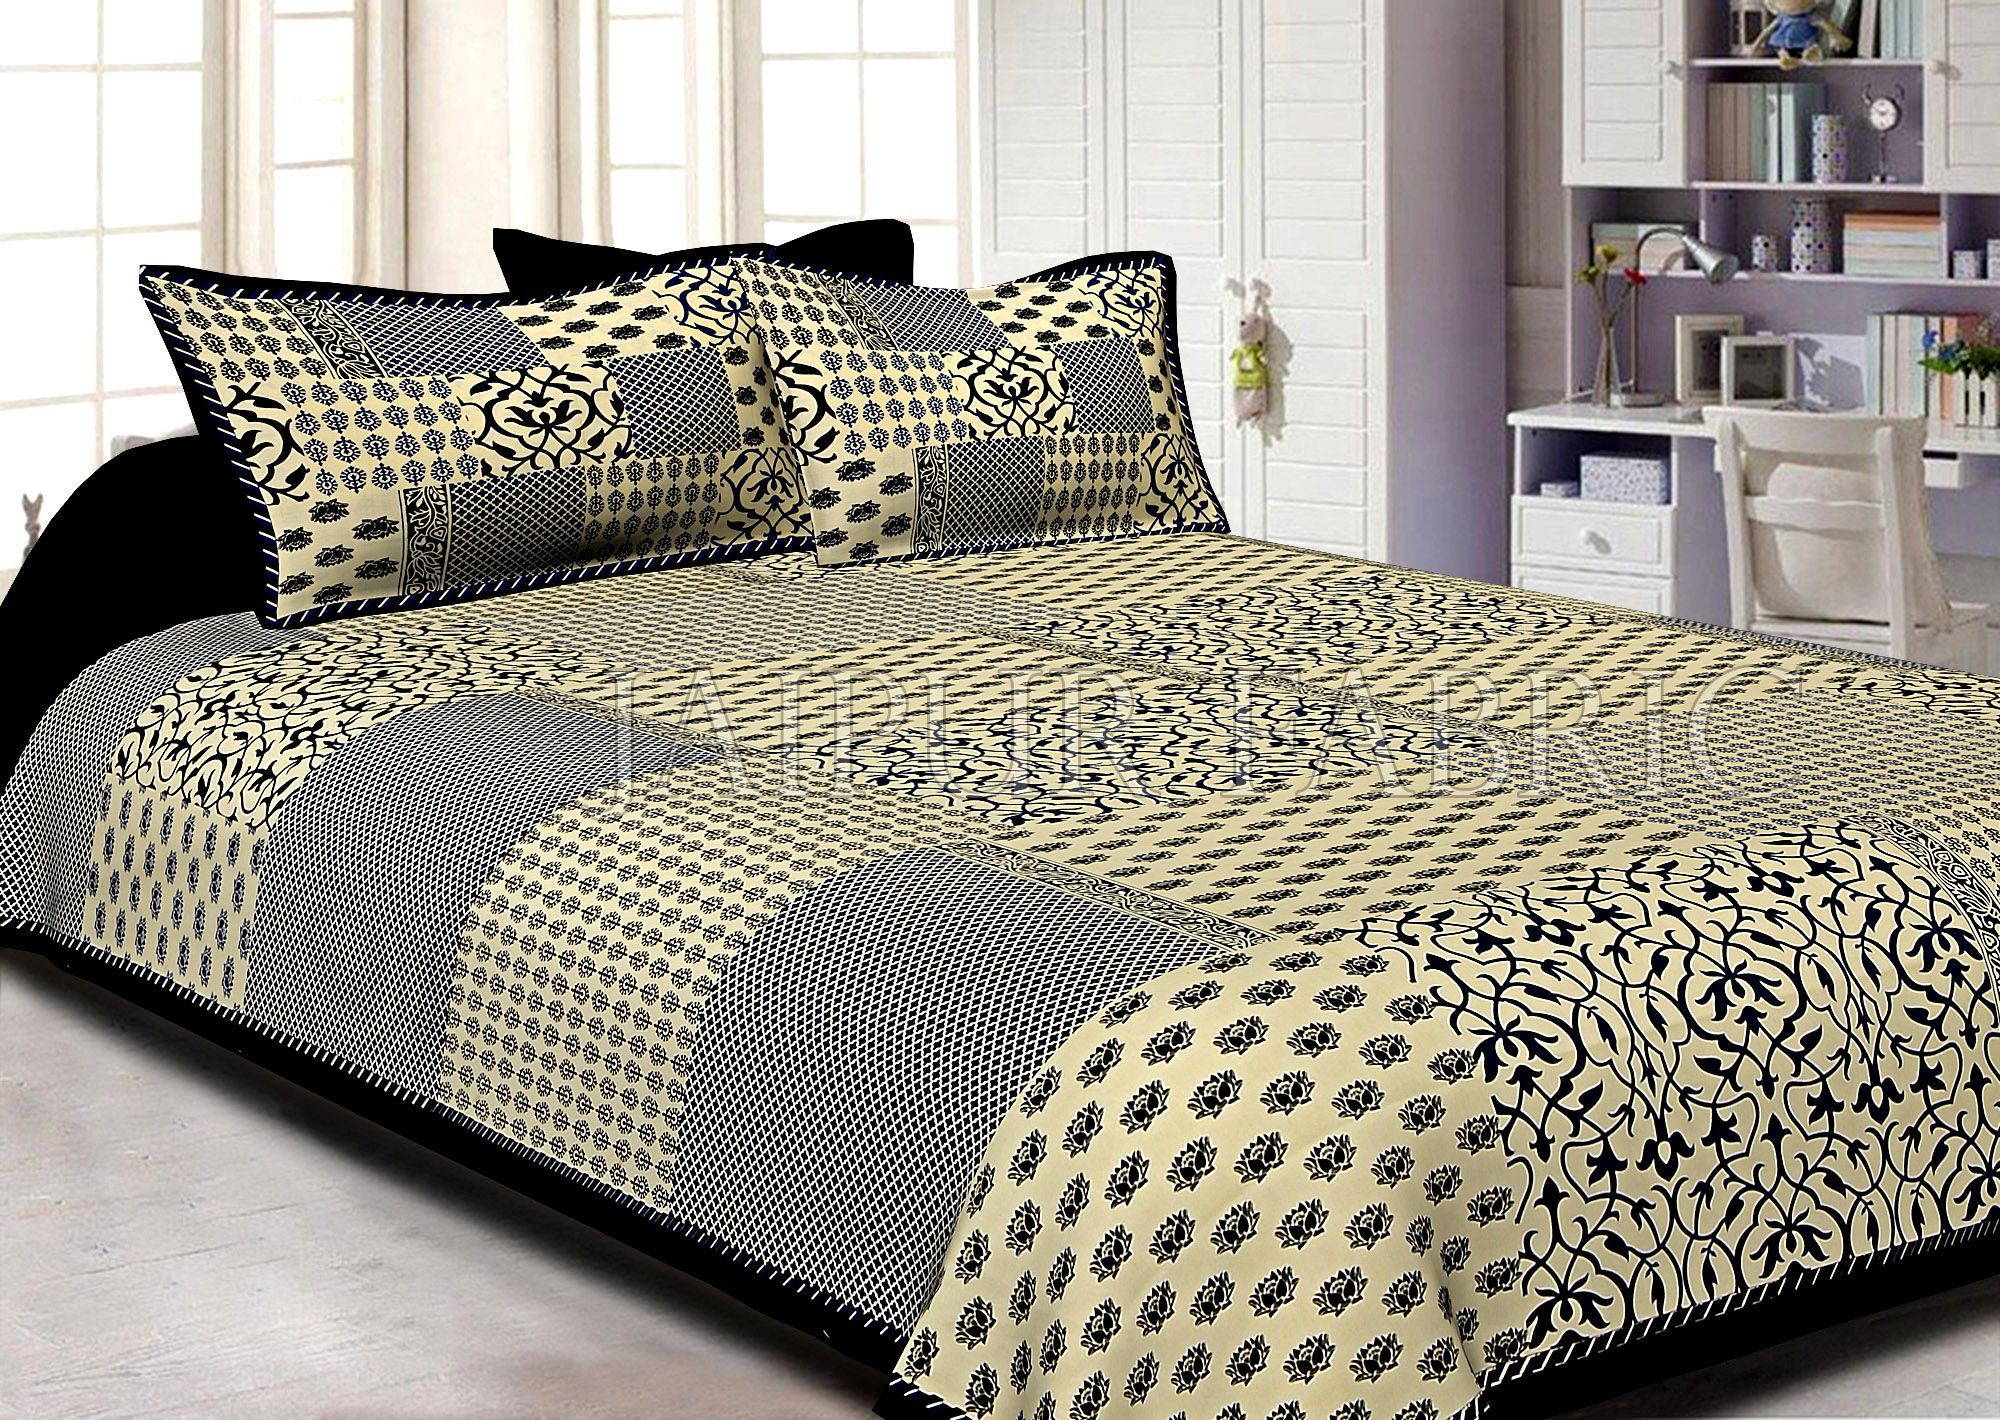 Black Border With Small Lotus Rangoli And Check Print Designer Patrn Fine Coton Poplin Double Bedsheet With Two Pillow Cover